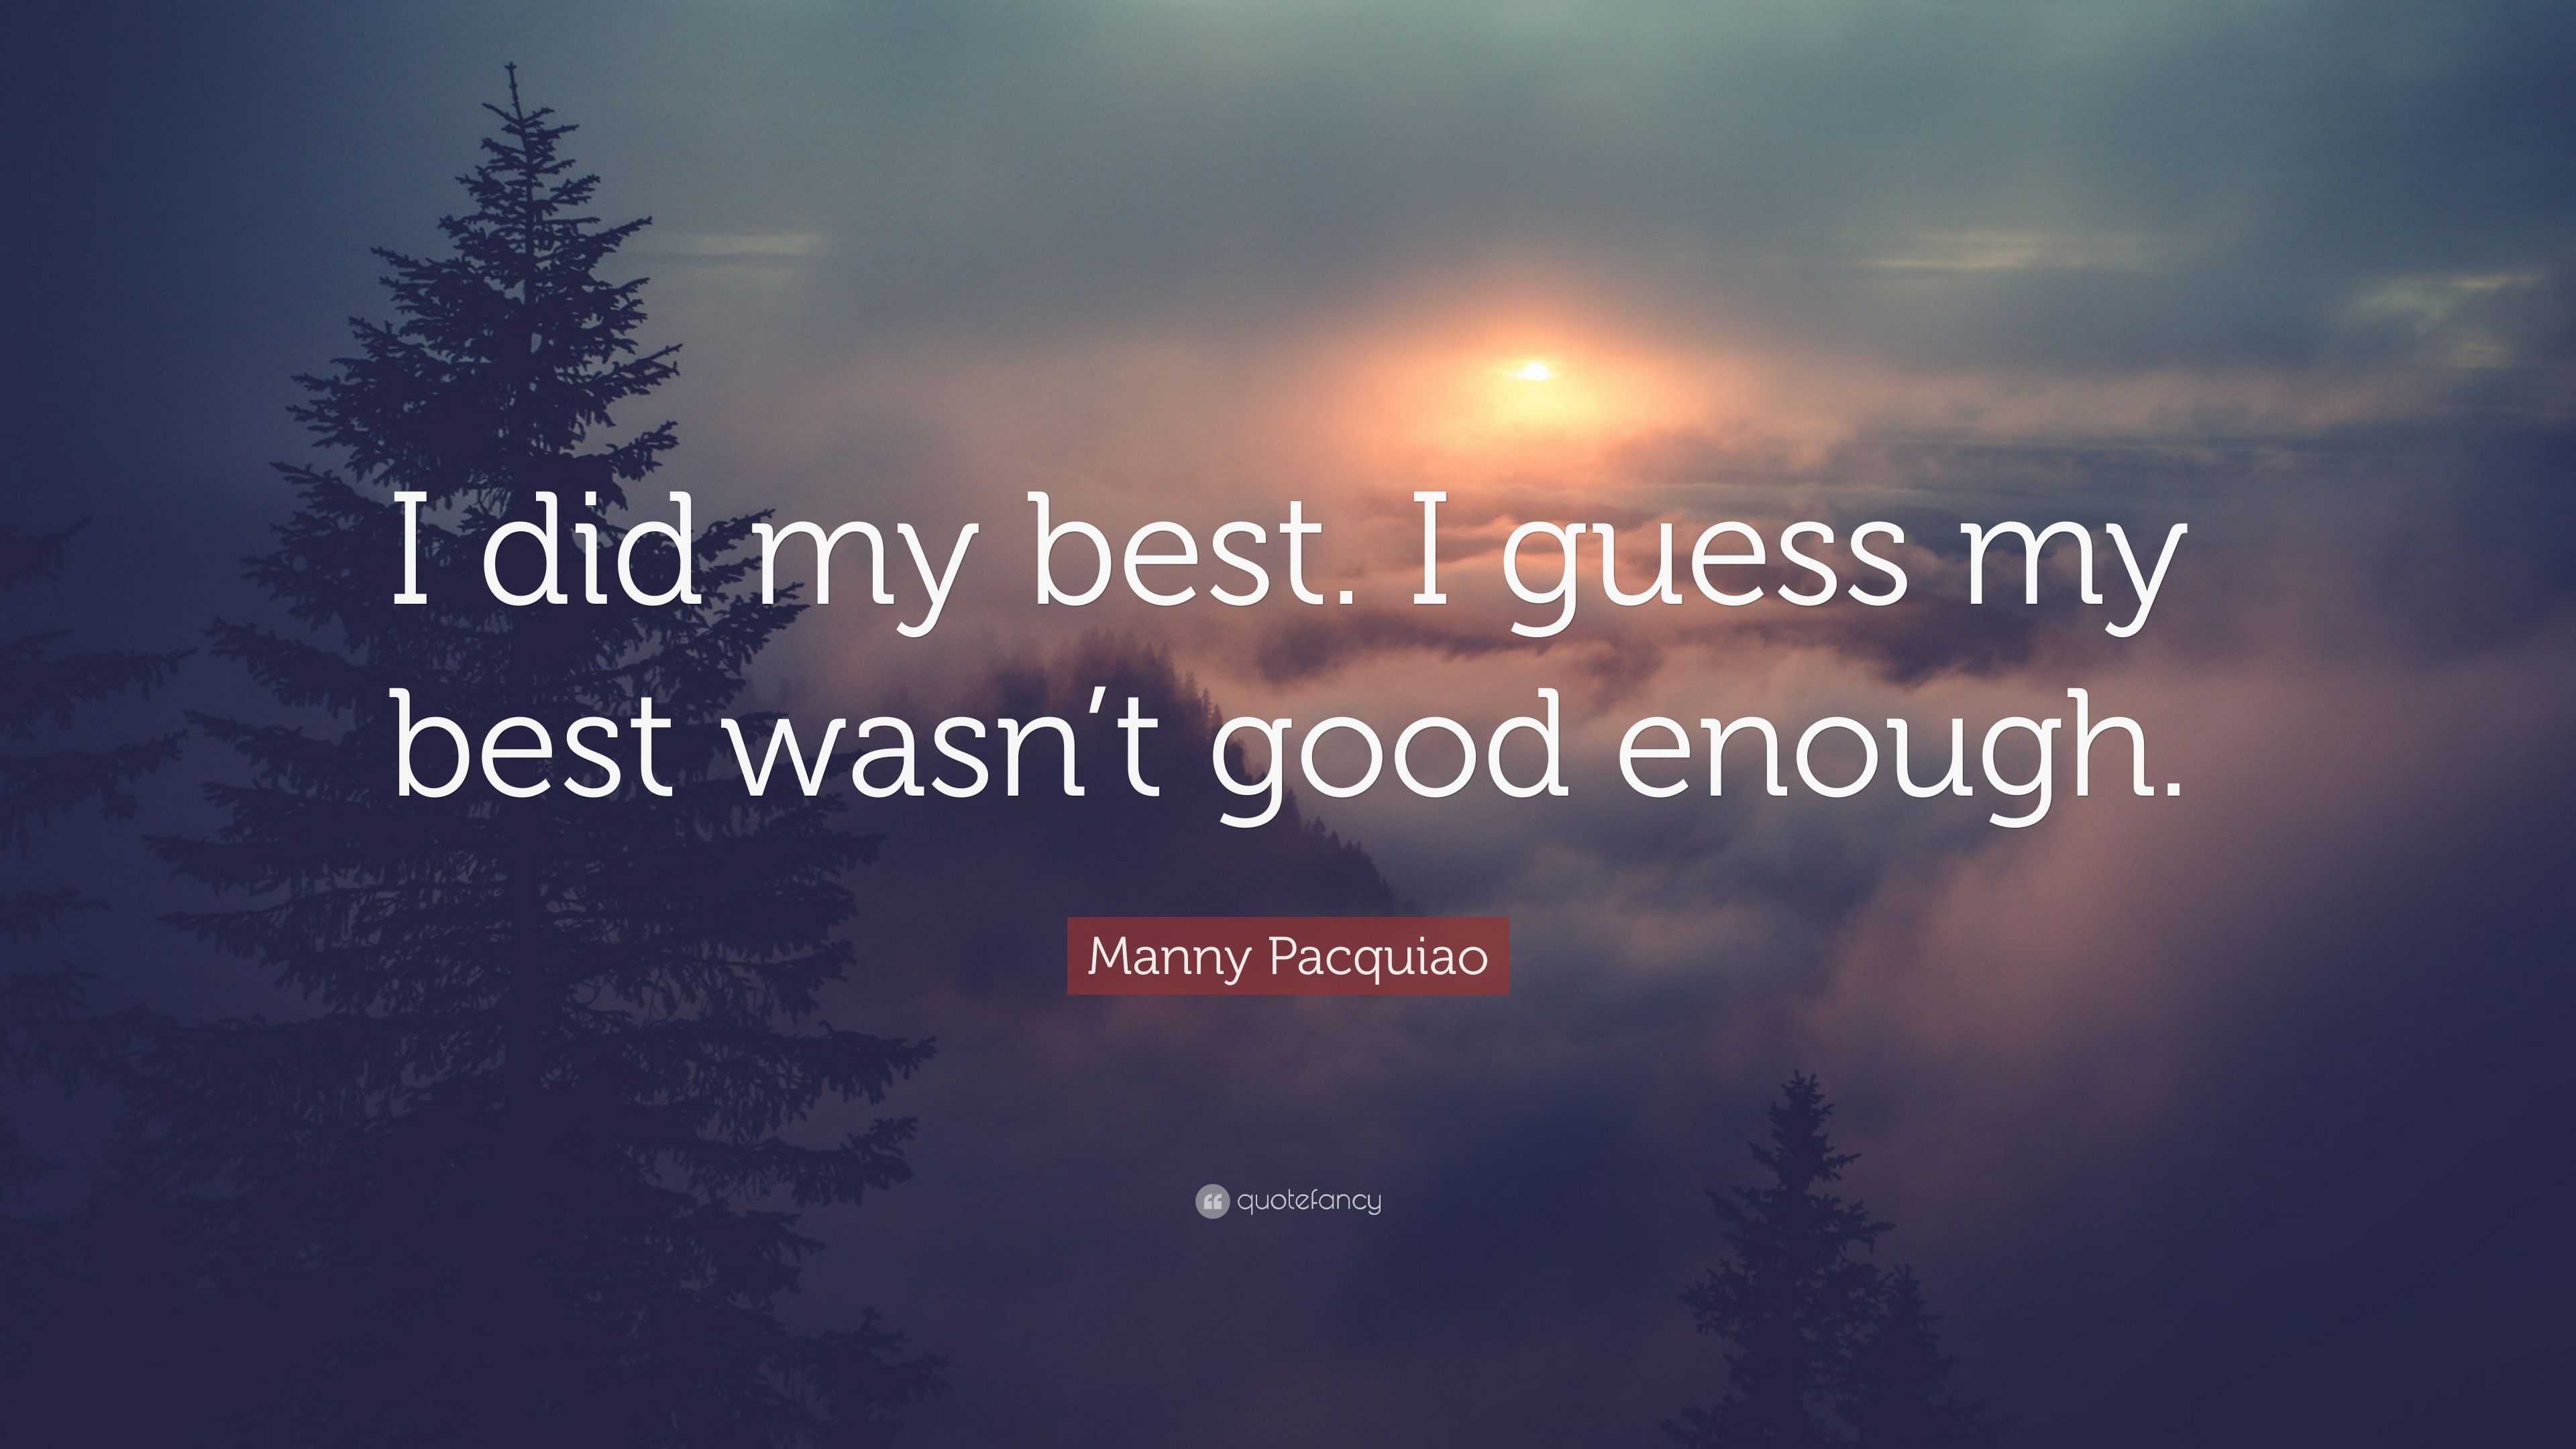 Manny Pacquiao Quote: “I did my best. my best wasn't good enough.”